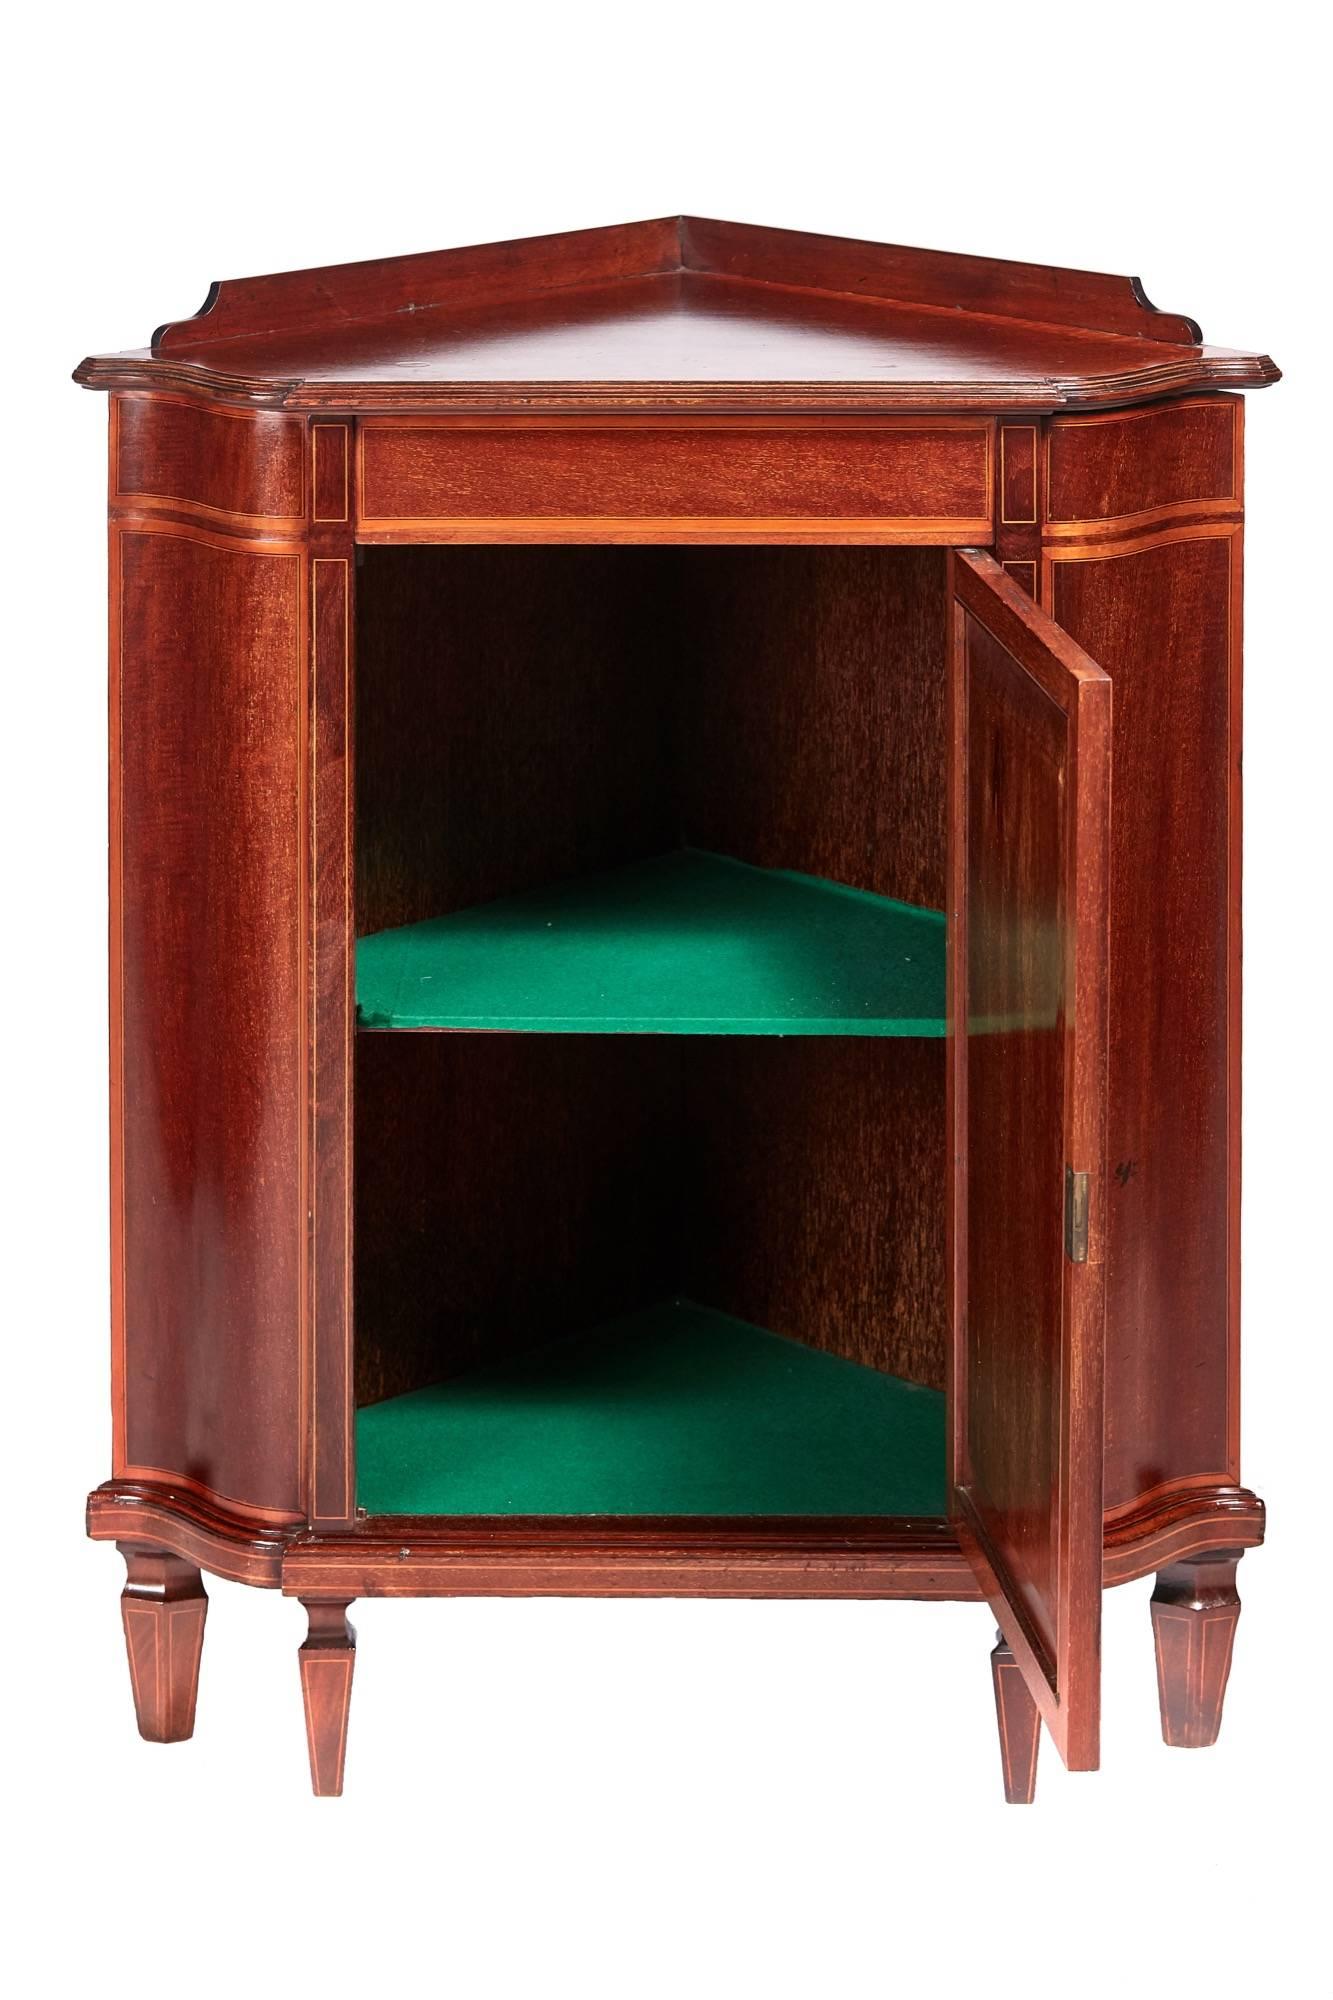 Fine quality Edwards and Roberts inlaid mahogany corner cabinet with a low gallery back lovely mahogany top crossbanded in satinwood, boxwood and ebony stringing, lovely inlaid satinwood shell to the centre door, opens to reveal a fitted shelf,